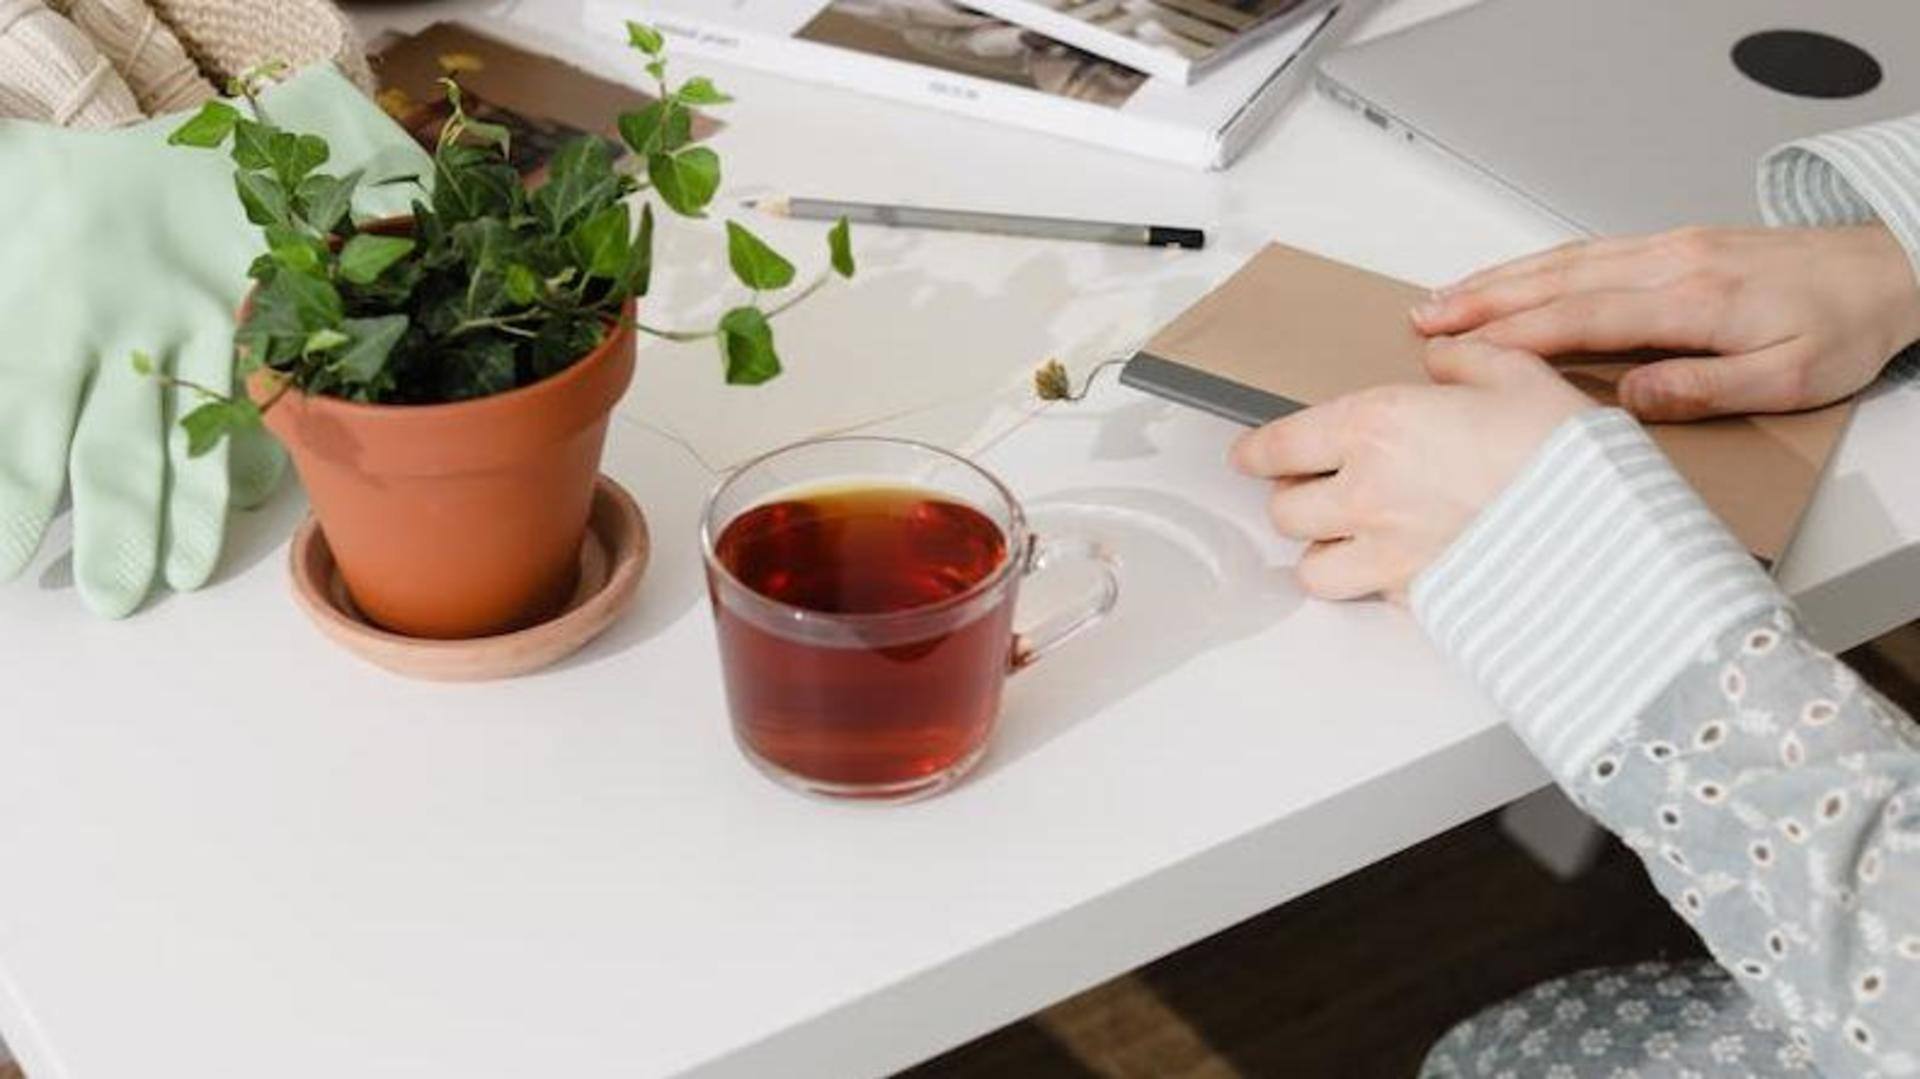 Revitalize with 5 refreshing tea recipes for at-home detox